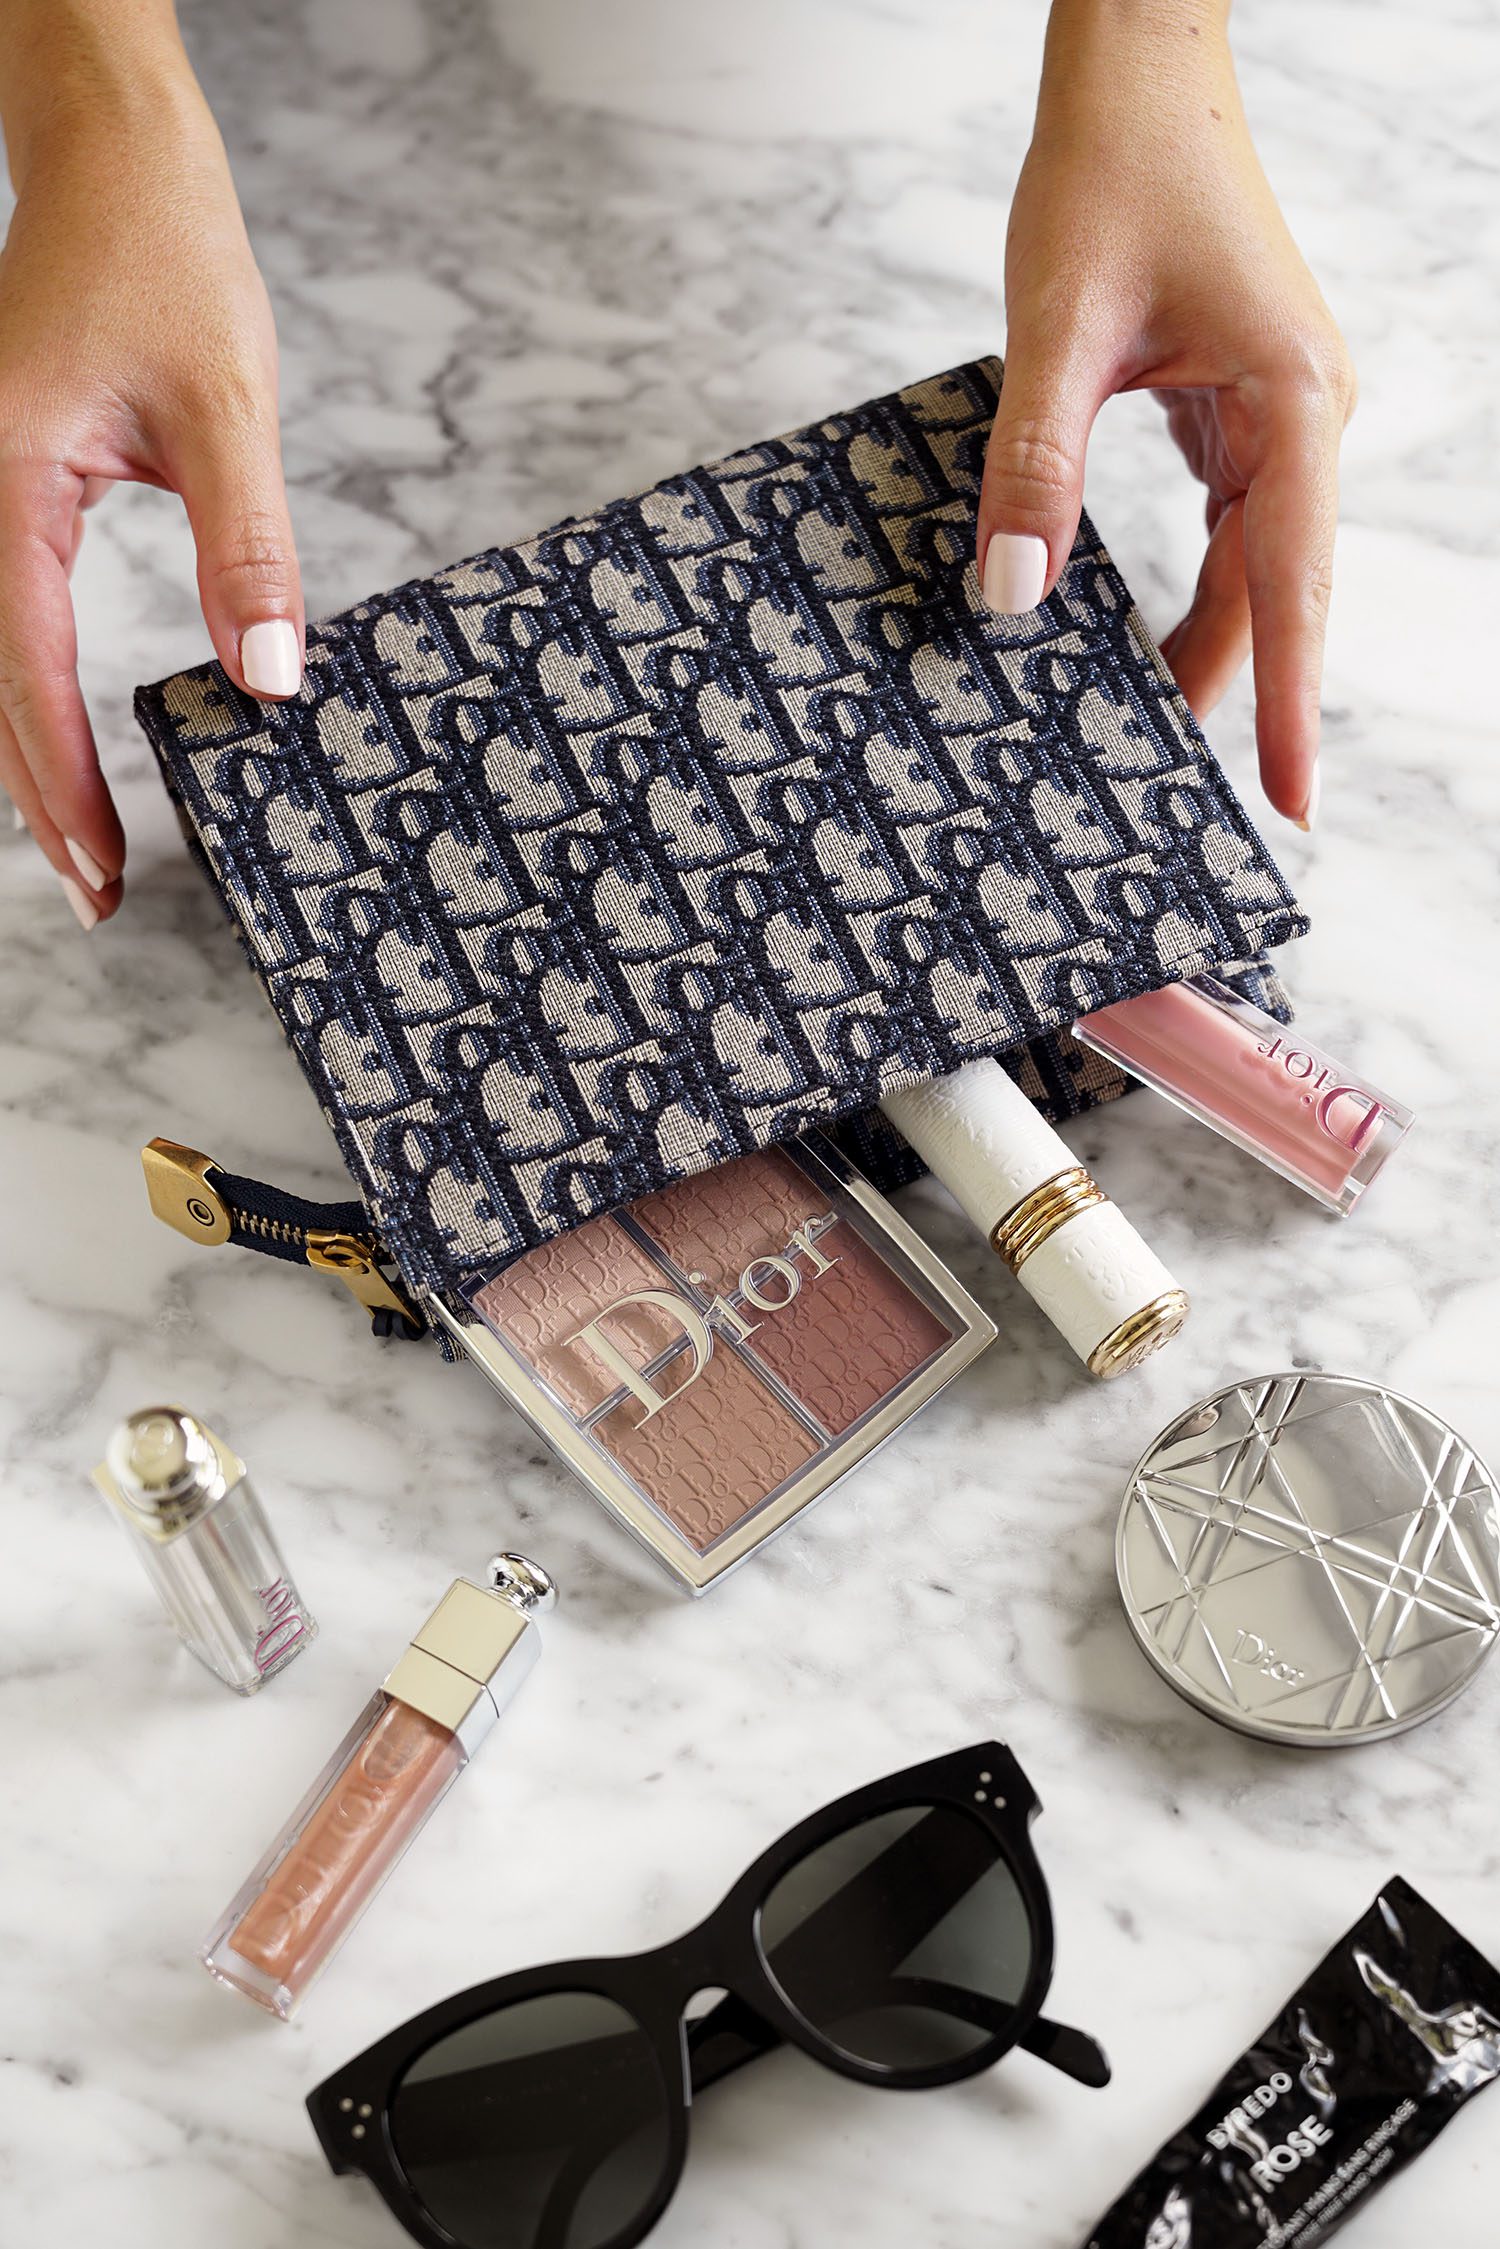 Truffle Clarity Clutches - The Beauty Look Book